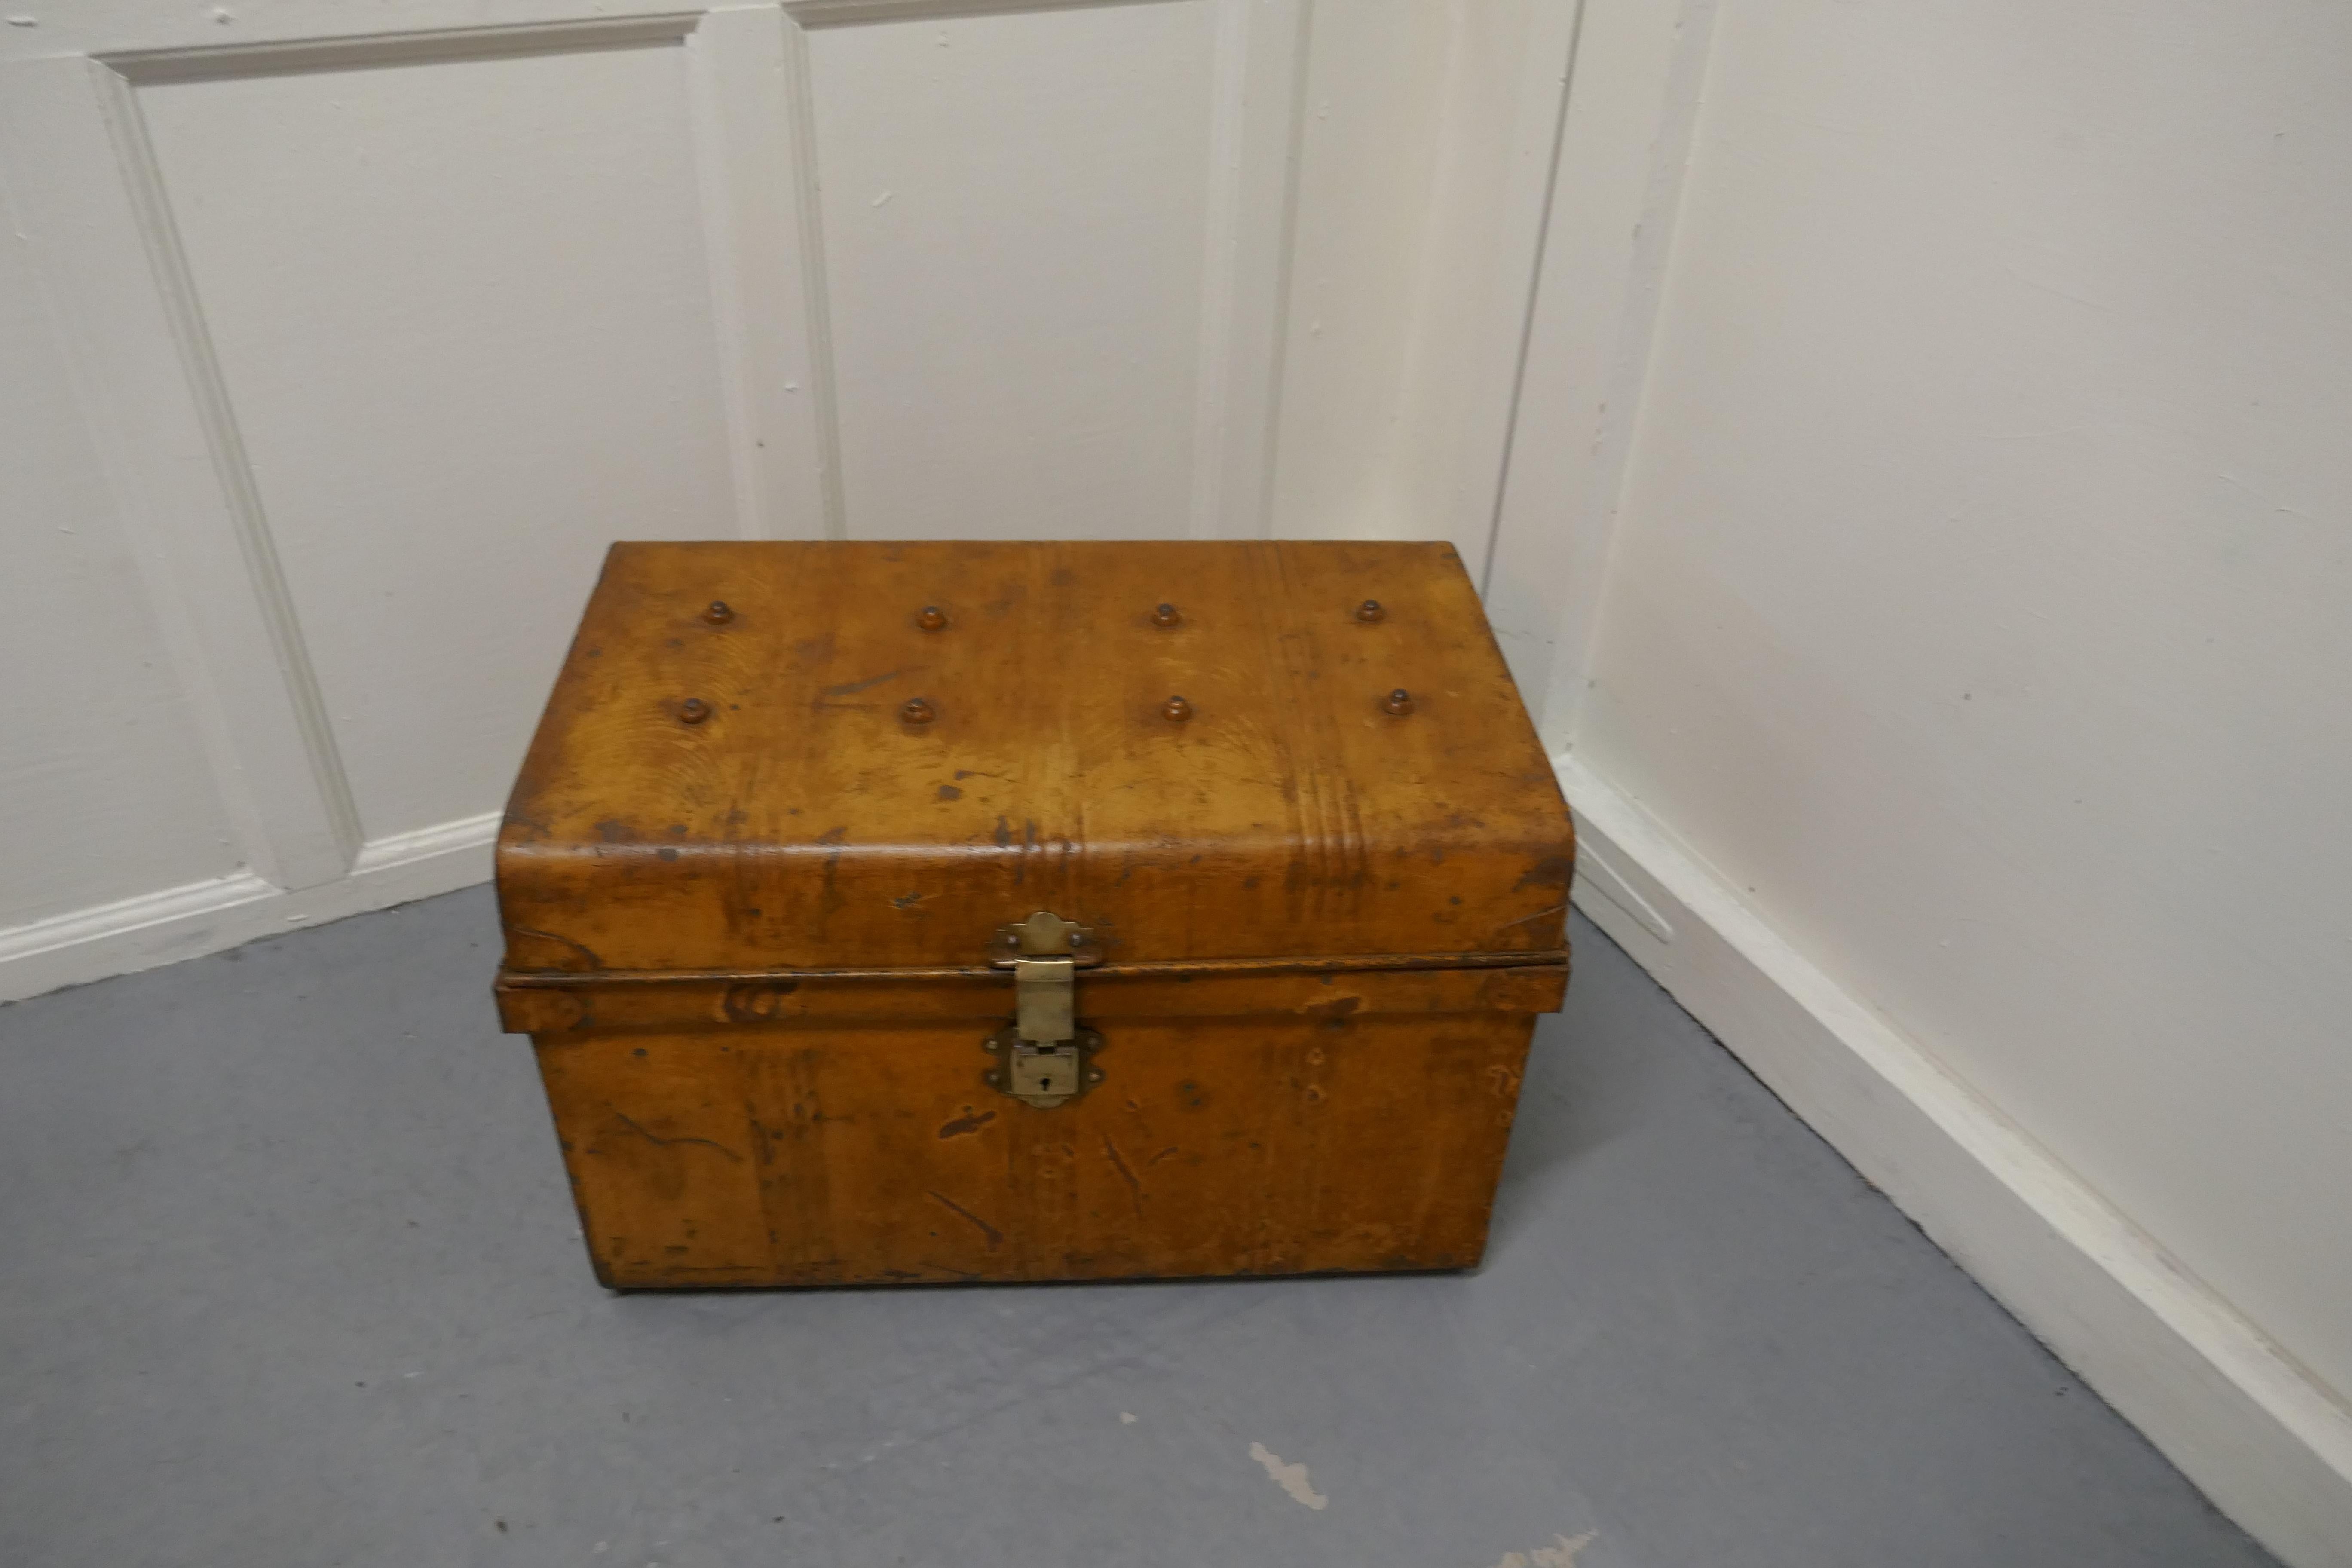 Victorian original scumble paint tin travel trunk

This is a 19th century tin travel trunk, it is is in very good condition for its age 
 
The interior is clean in its original red paint, the trunk has carrying handles and a brass latch to the